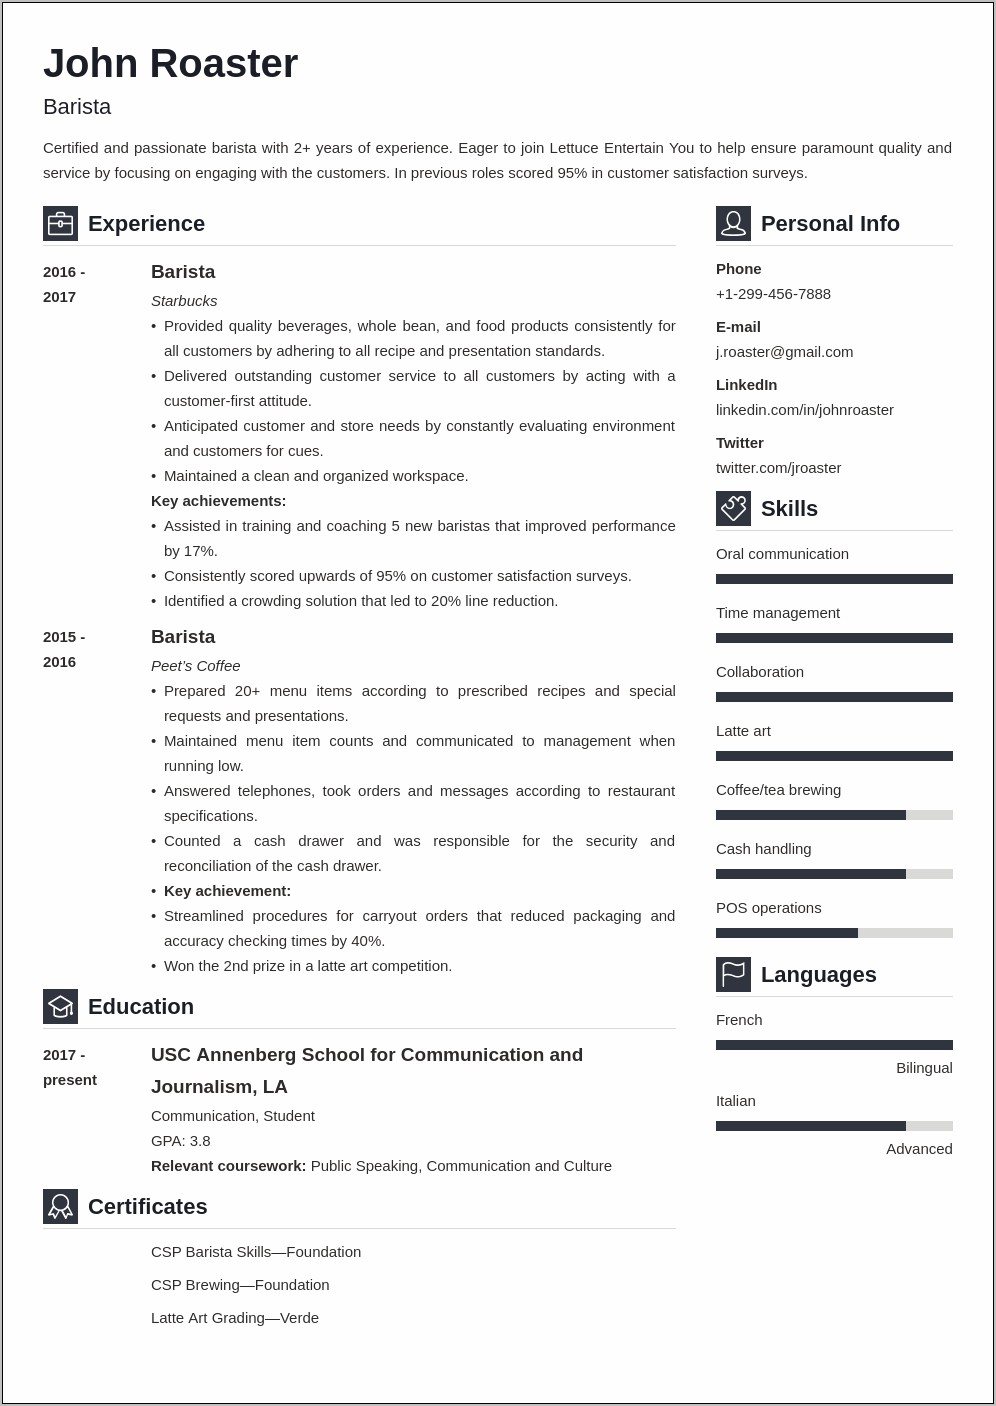 Hobby Section Of Resume Example